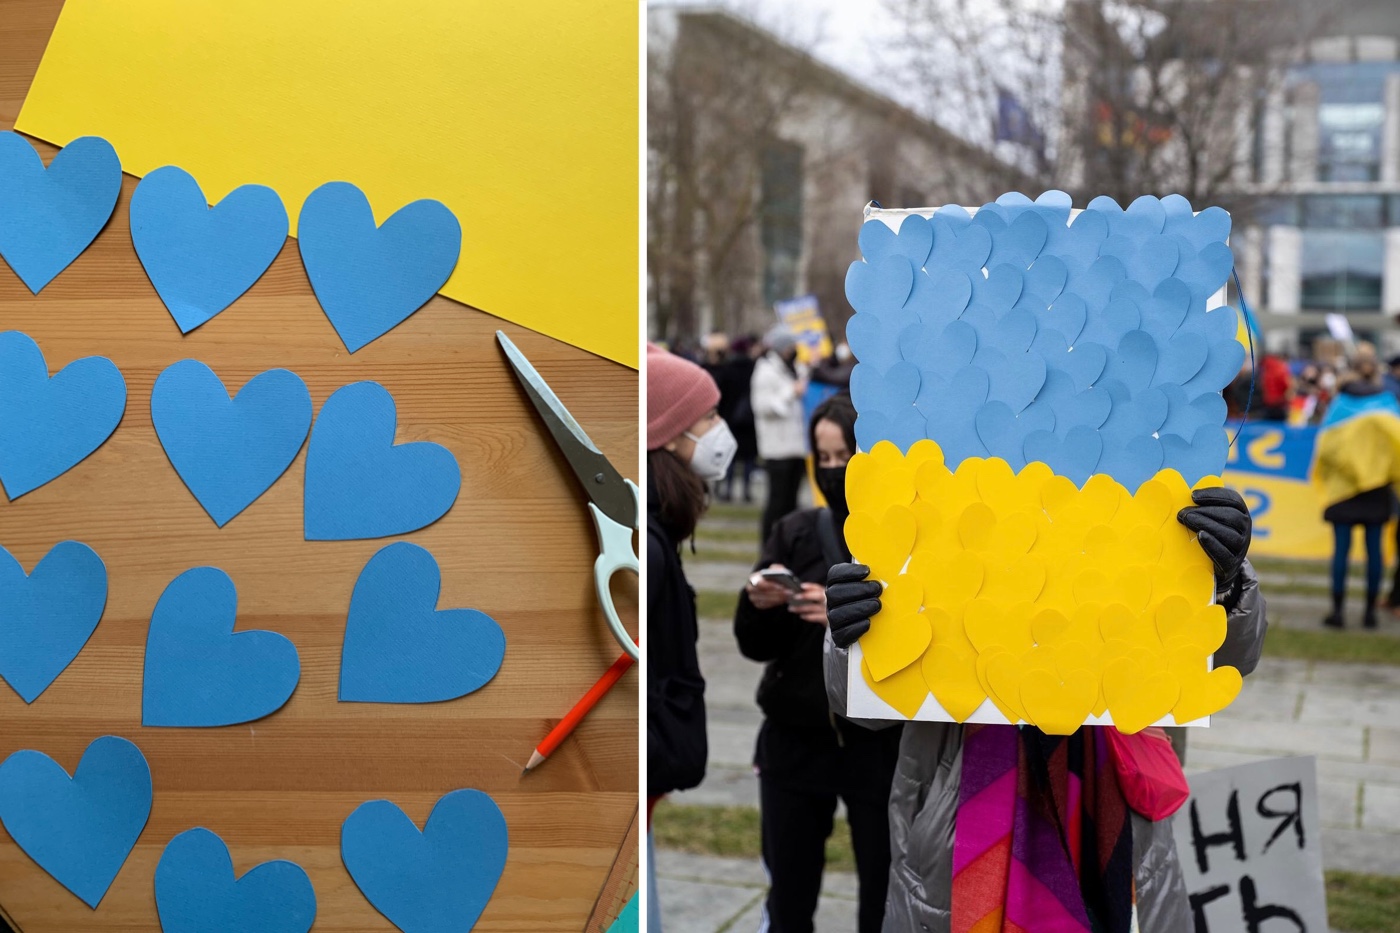 On the left: blue hearts cut out of paper. On the right: handmade poster consisting of blue and yellow paper hearts.